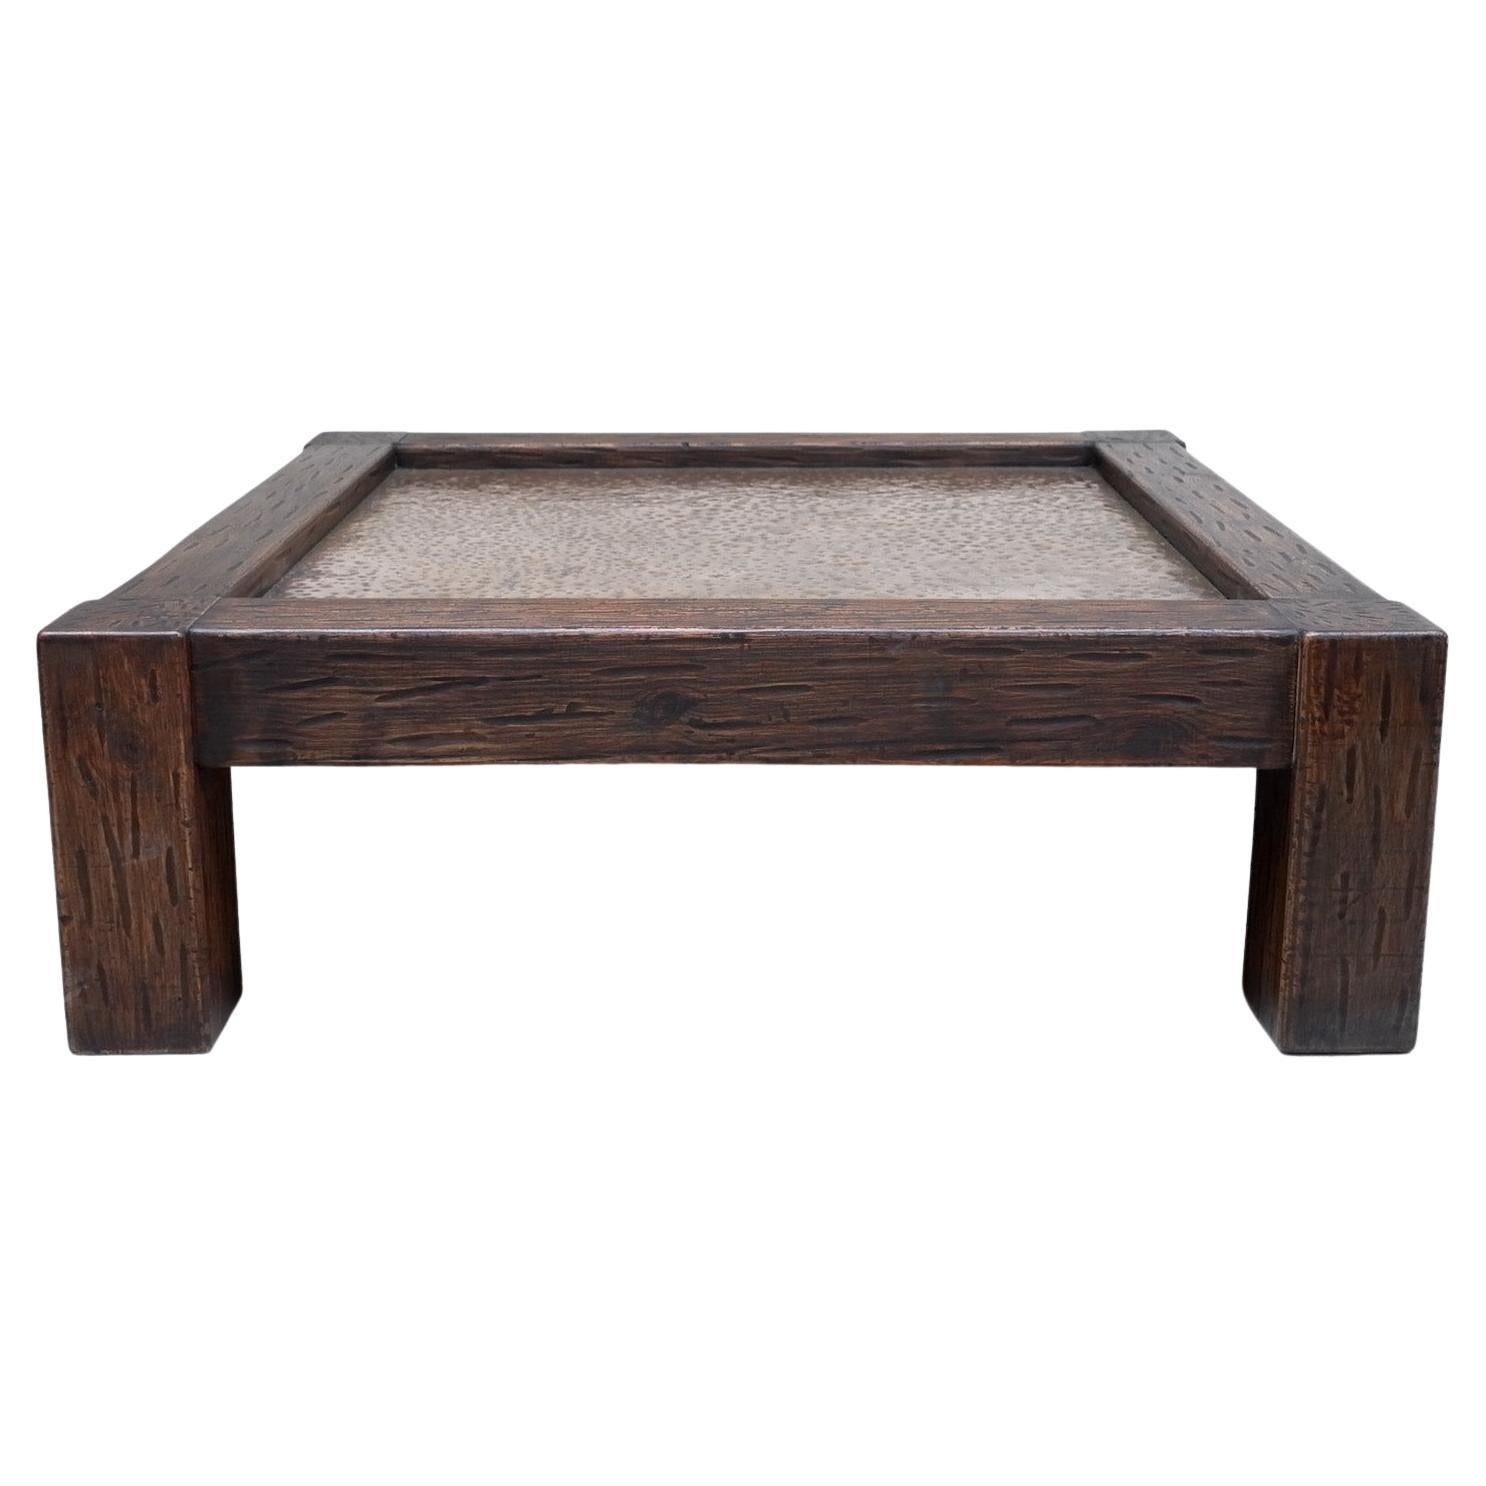 Very Large Unique Hewn Pine & Hammered Copper Brutalist Coffee Table